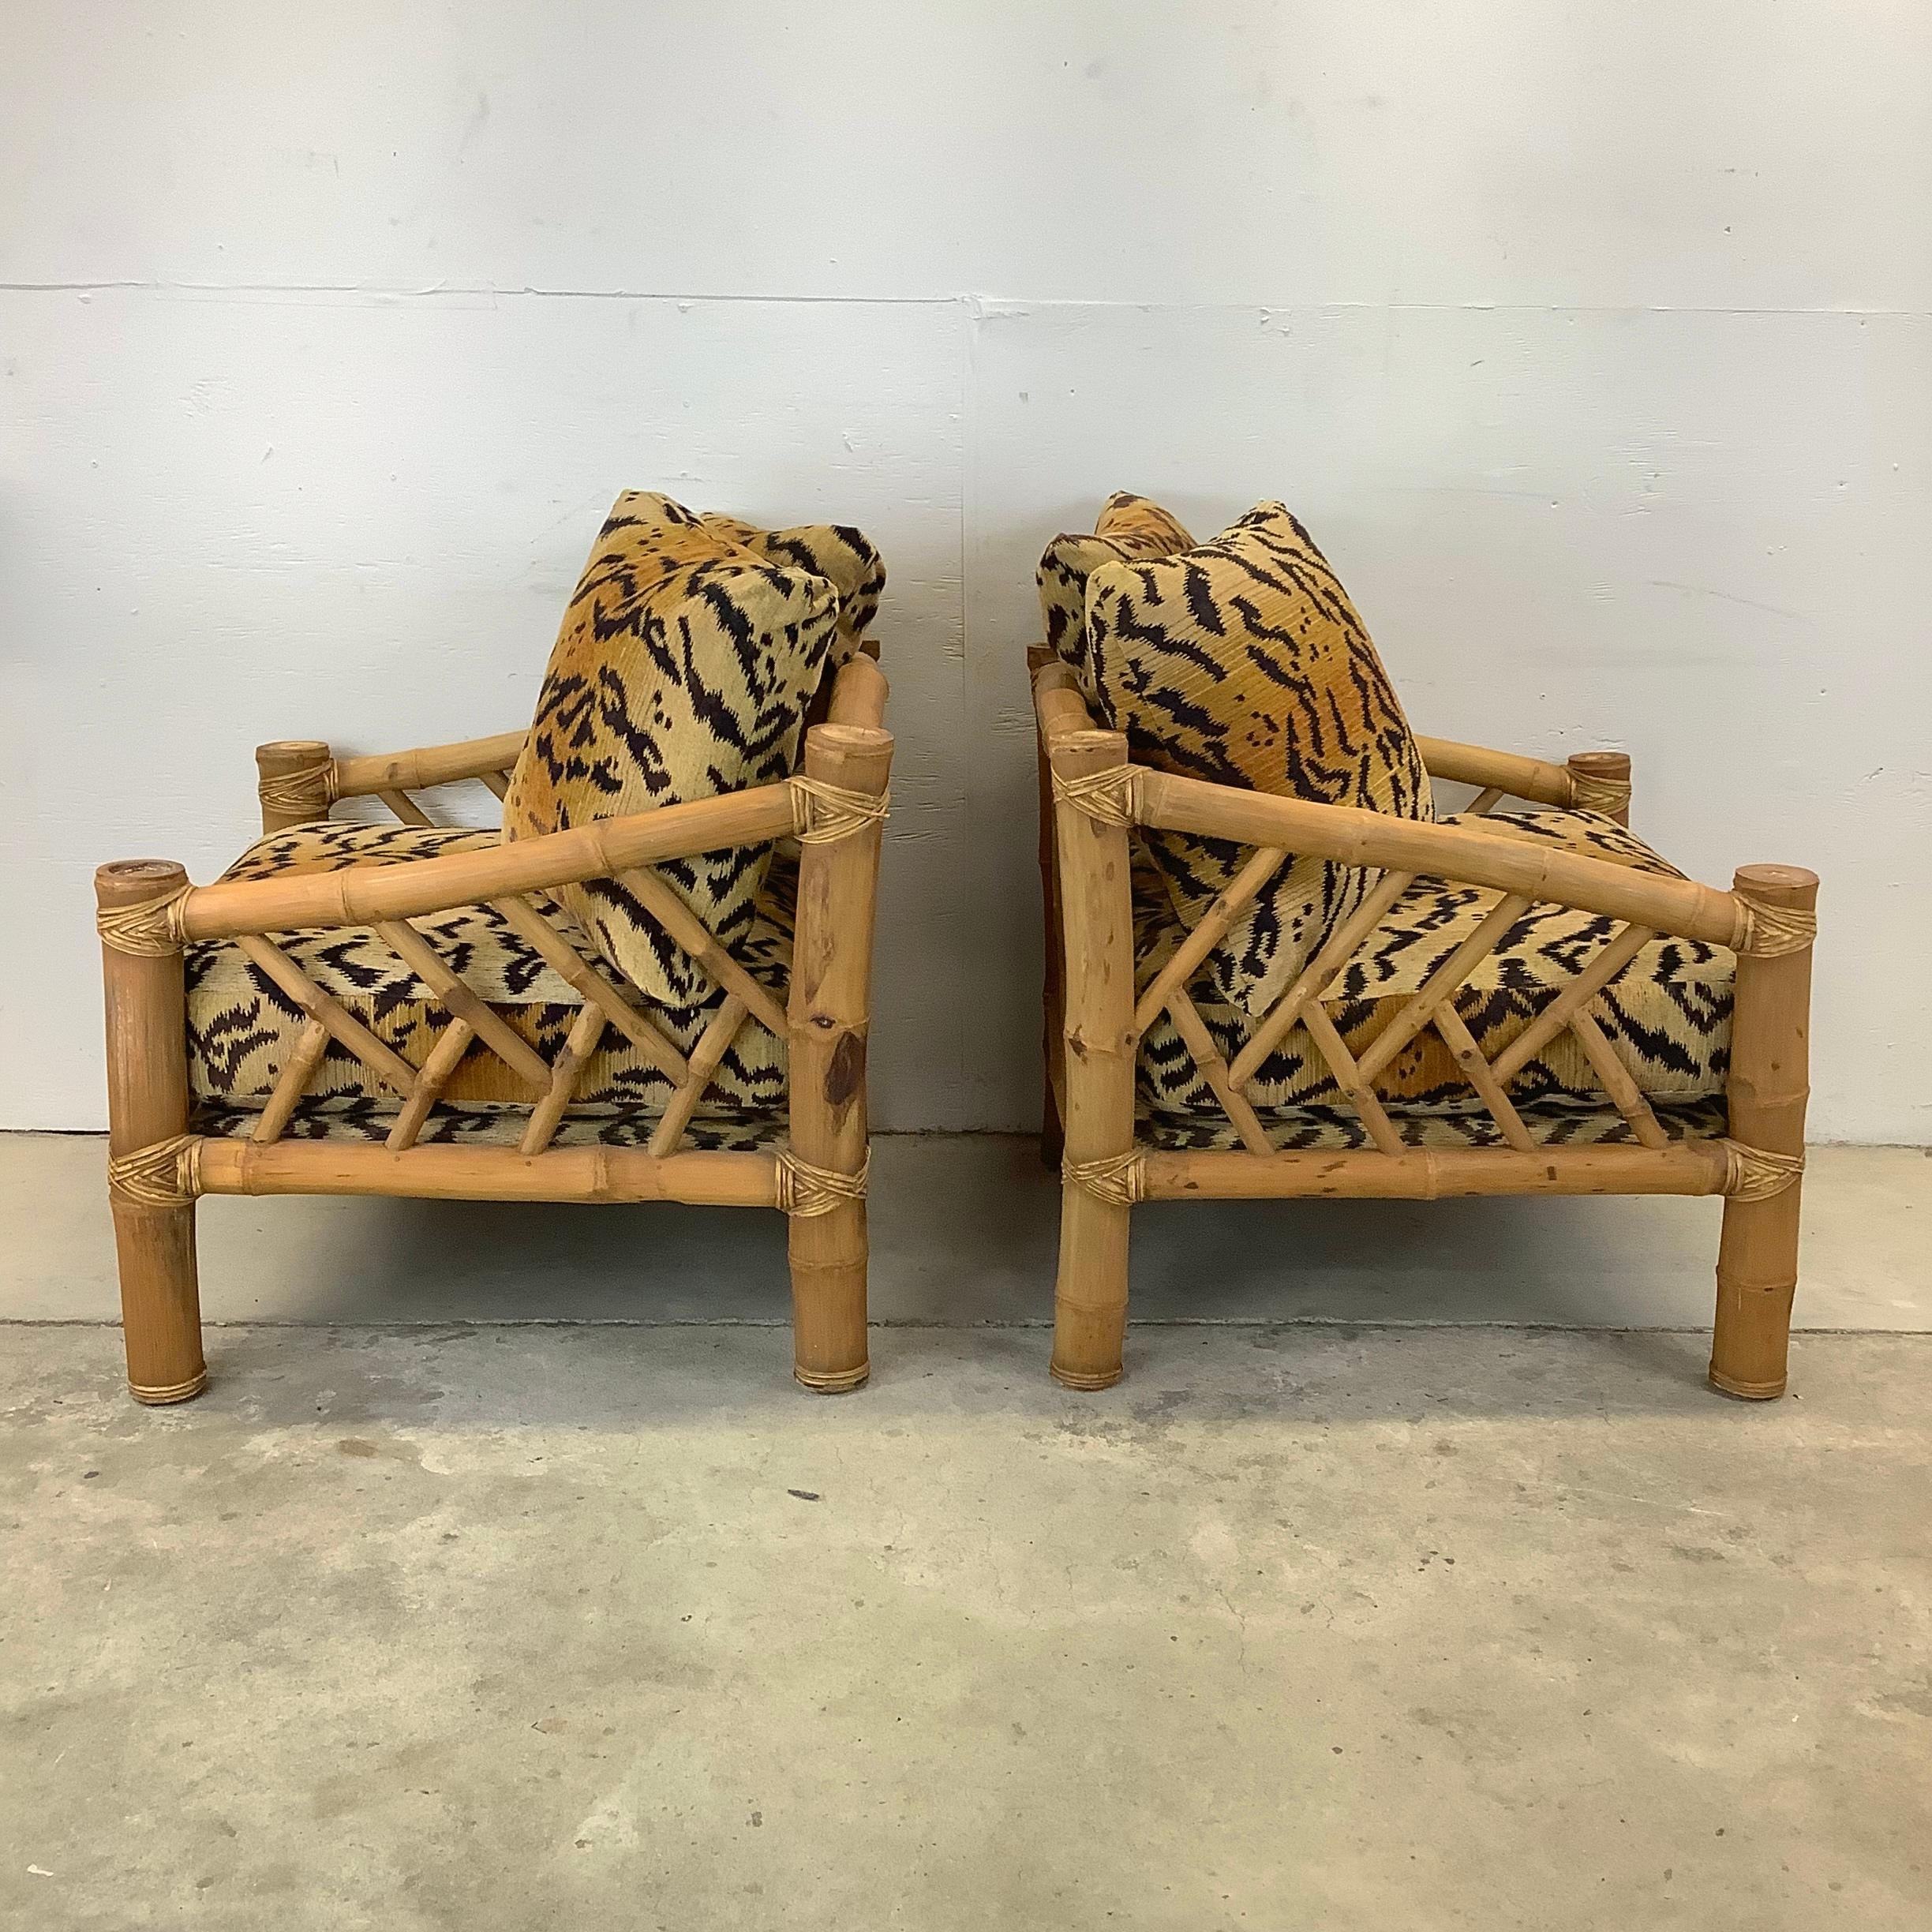 Pair Vintage Bamboo Armchairs & Ottoman in Tiger Print 1